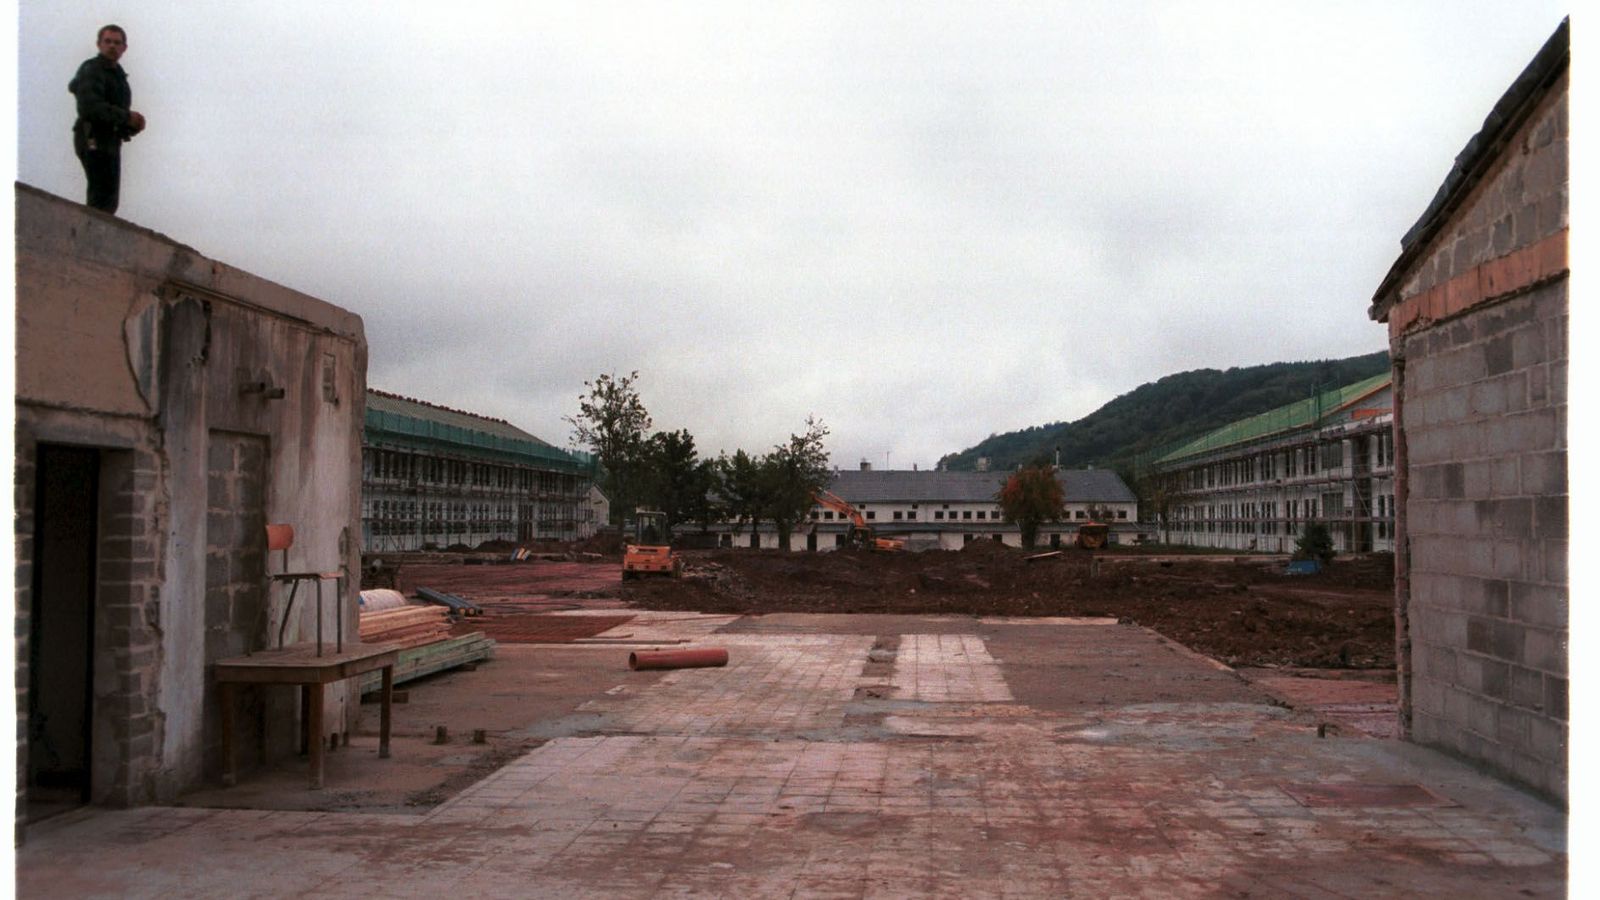 In the beginning, the site was a complete construction site